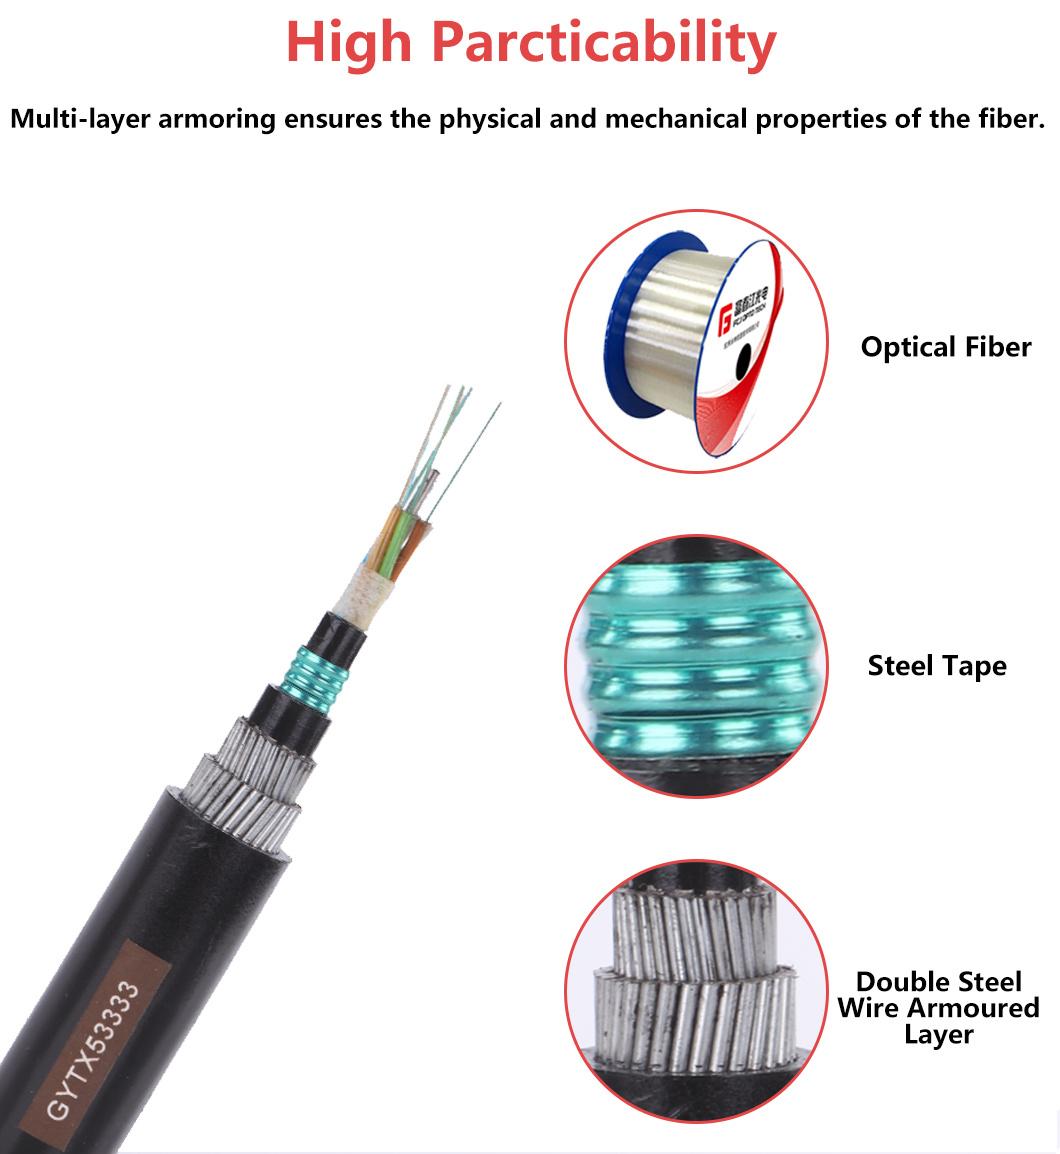 Made in China Single Mode Fiber Optic Cable Gjyxch GJYXFCH FTTH Drop Cable